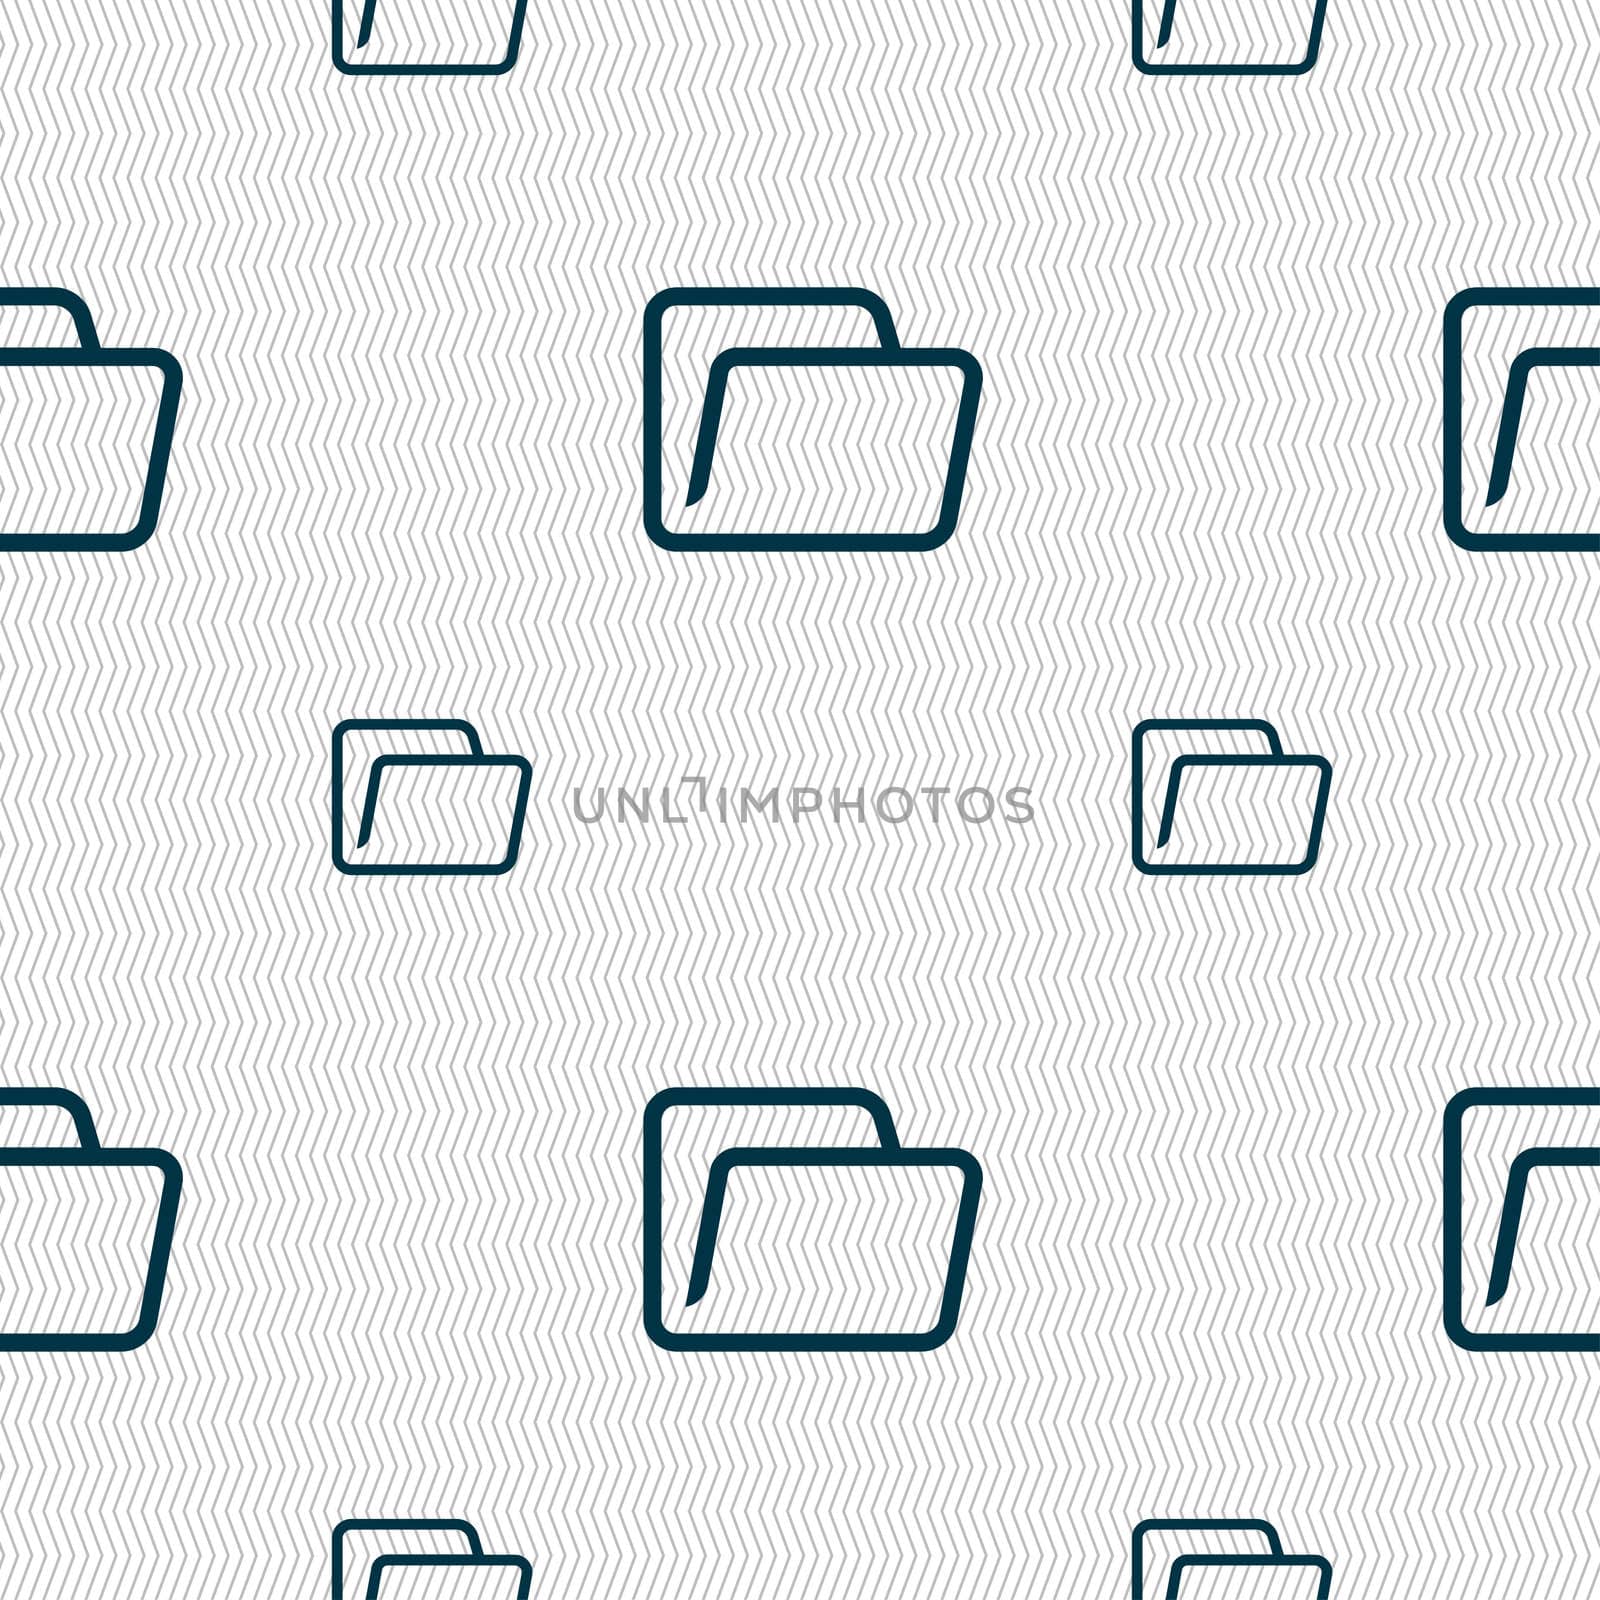 Folder icon sign. Seamless pattern with geometric texture. illustration